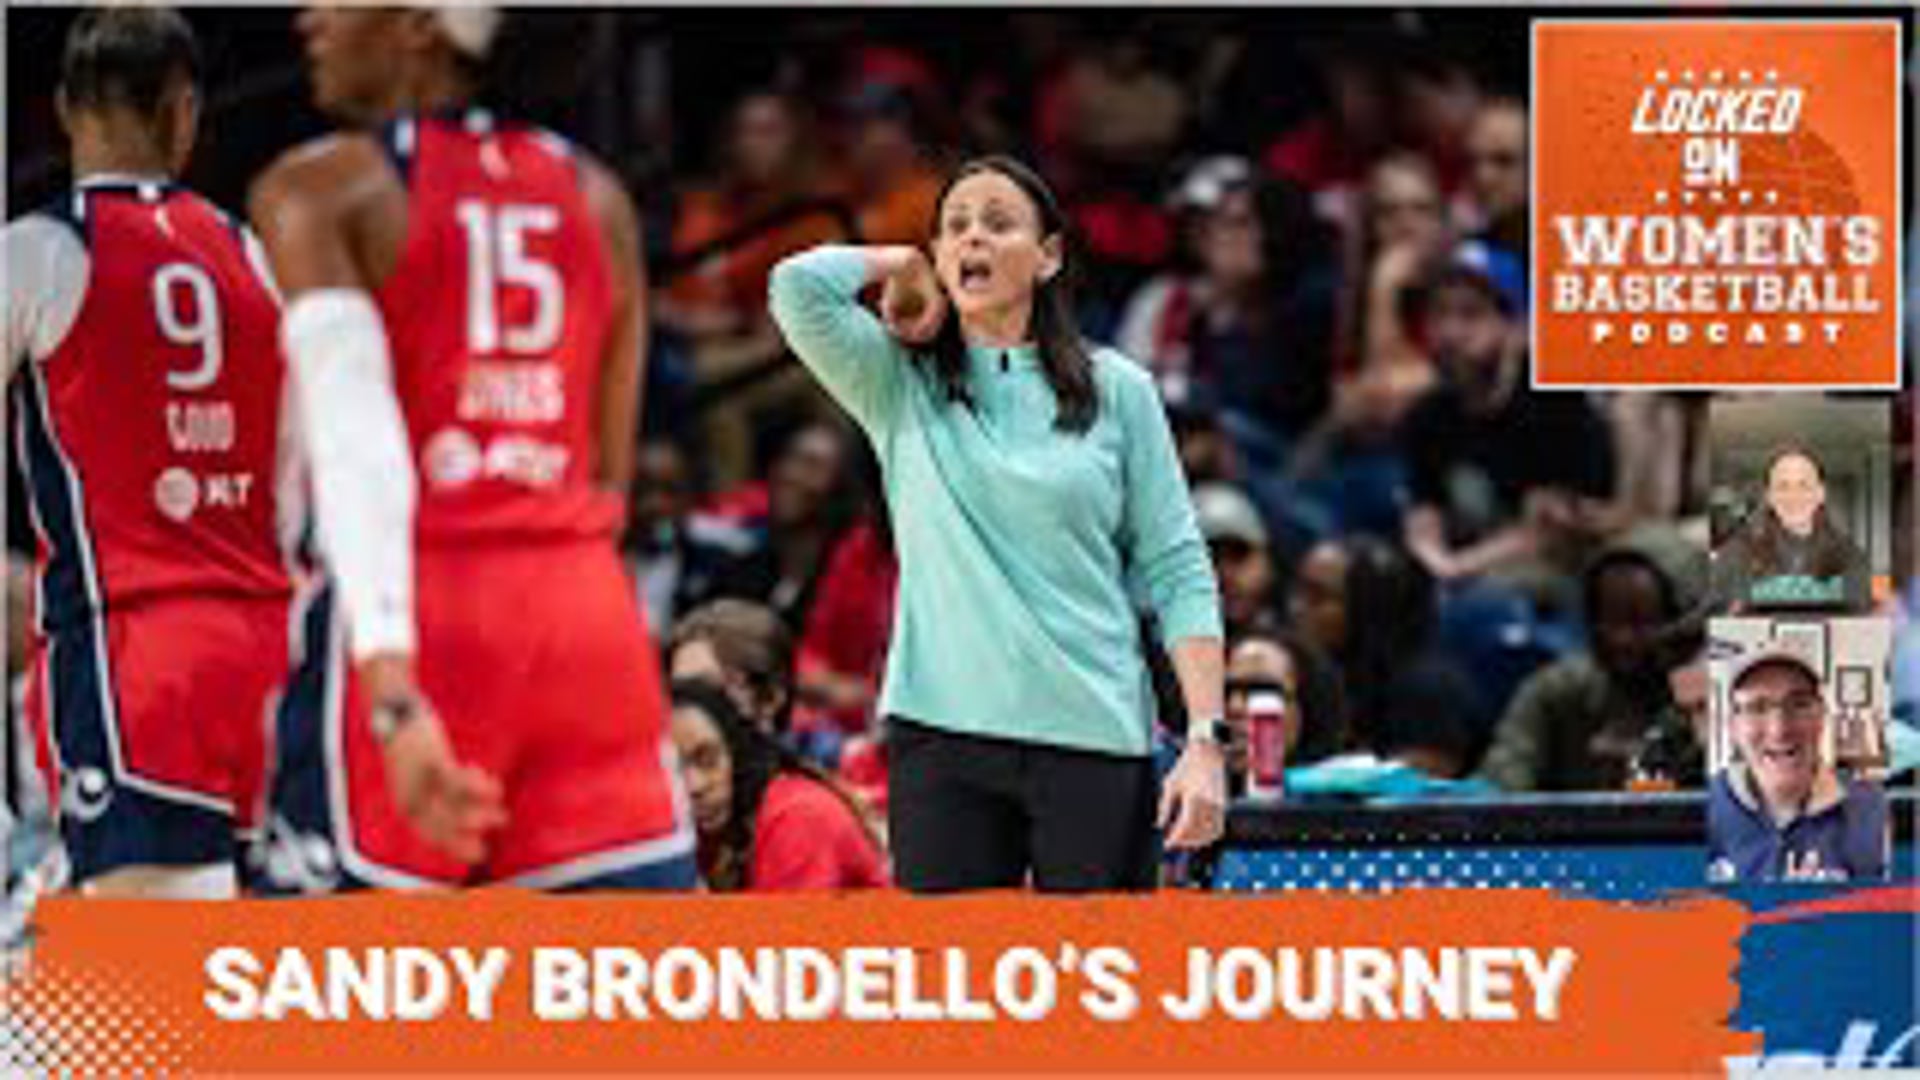 Sandy Brondello's WNBA tenure is nearly as long as the WNBA itself, first as a standout player, now as among the most accomplished head coaches in history.